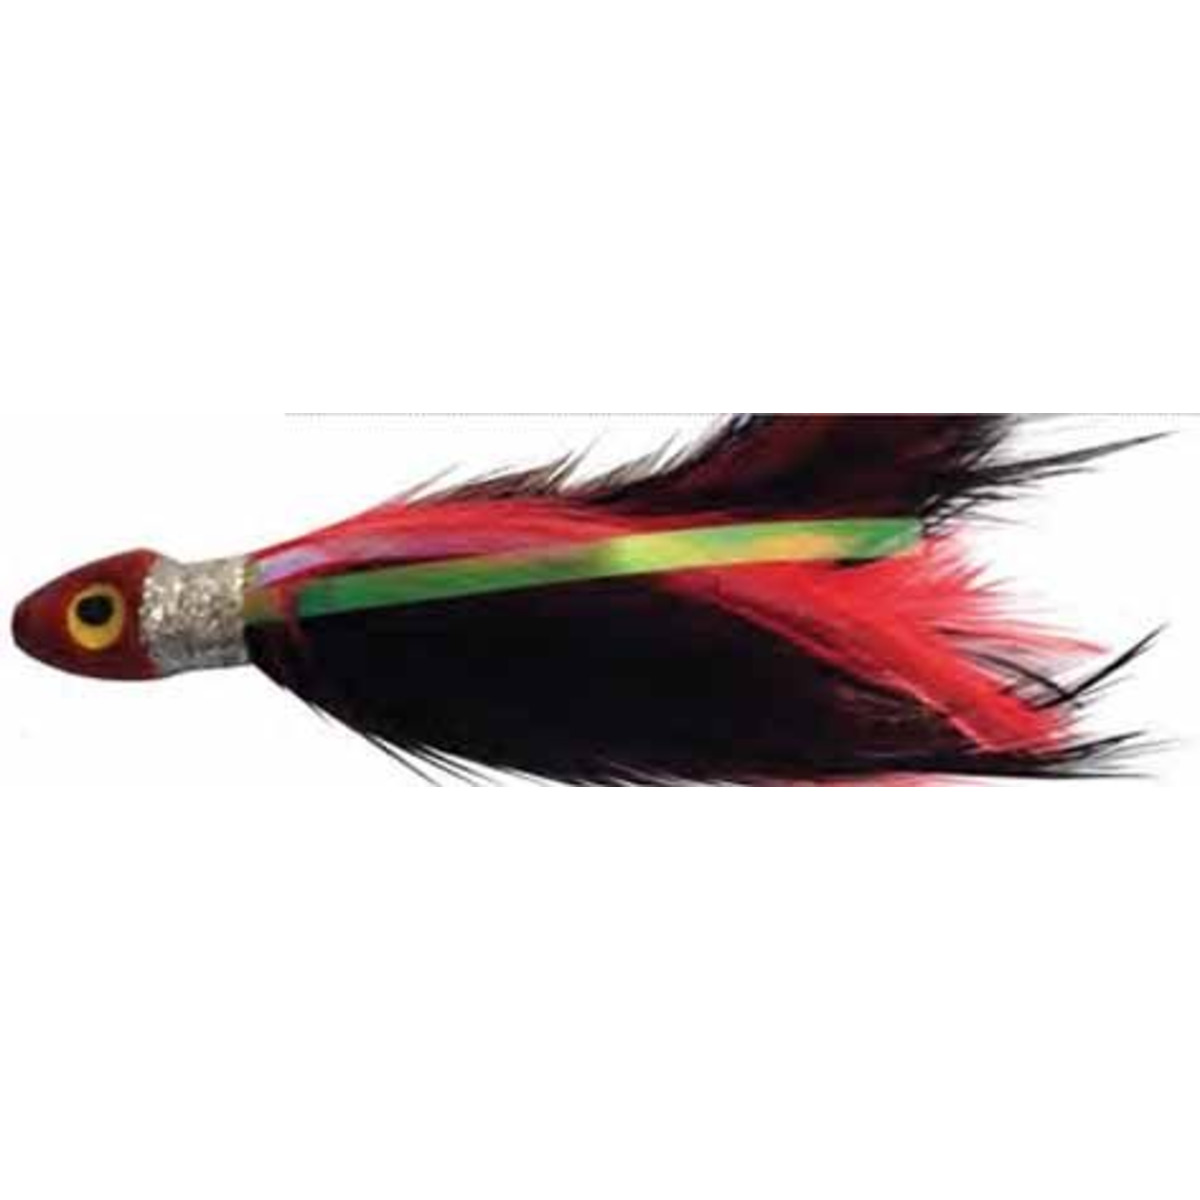 H2o Pro Feather Jet - Red Black - 19 g - 8.5 cm